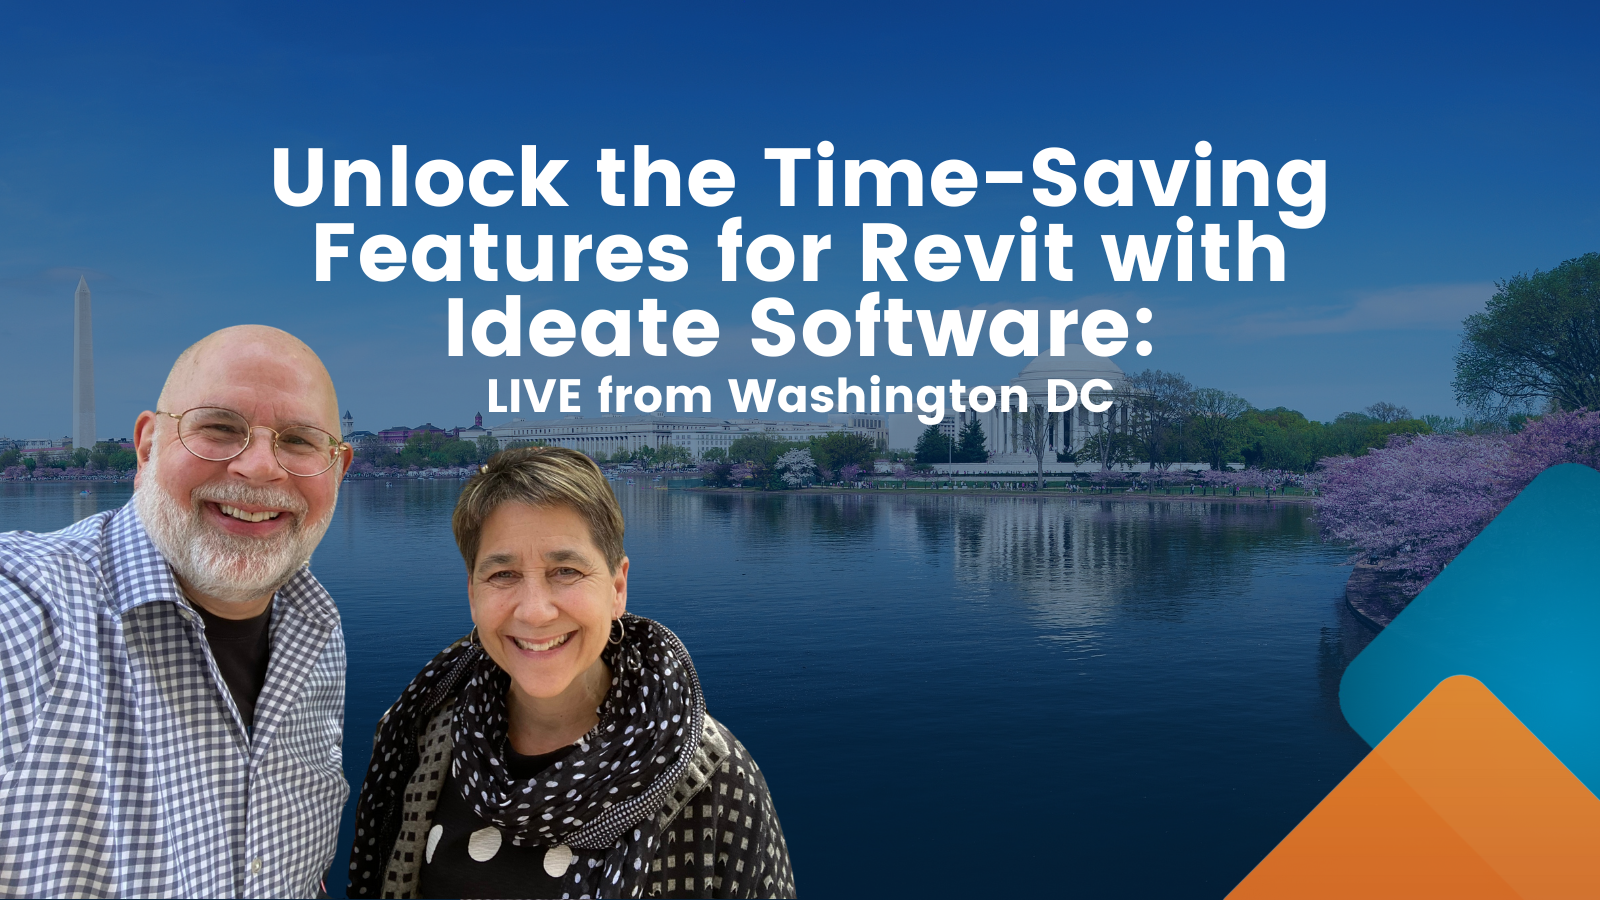 Live From DC: Unlock the Time-Saving Features for Revit with Ideate Software